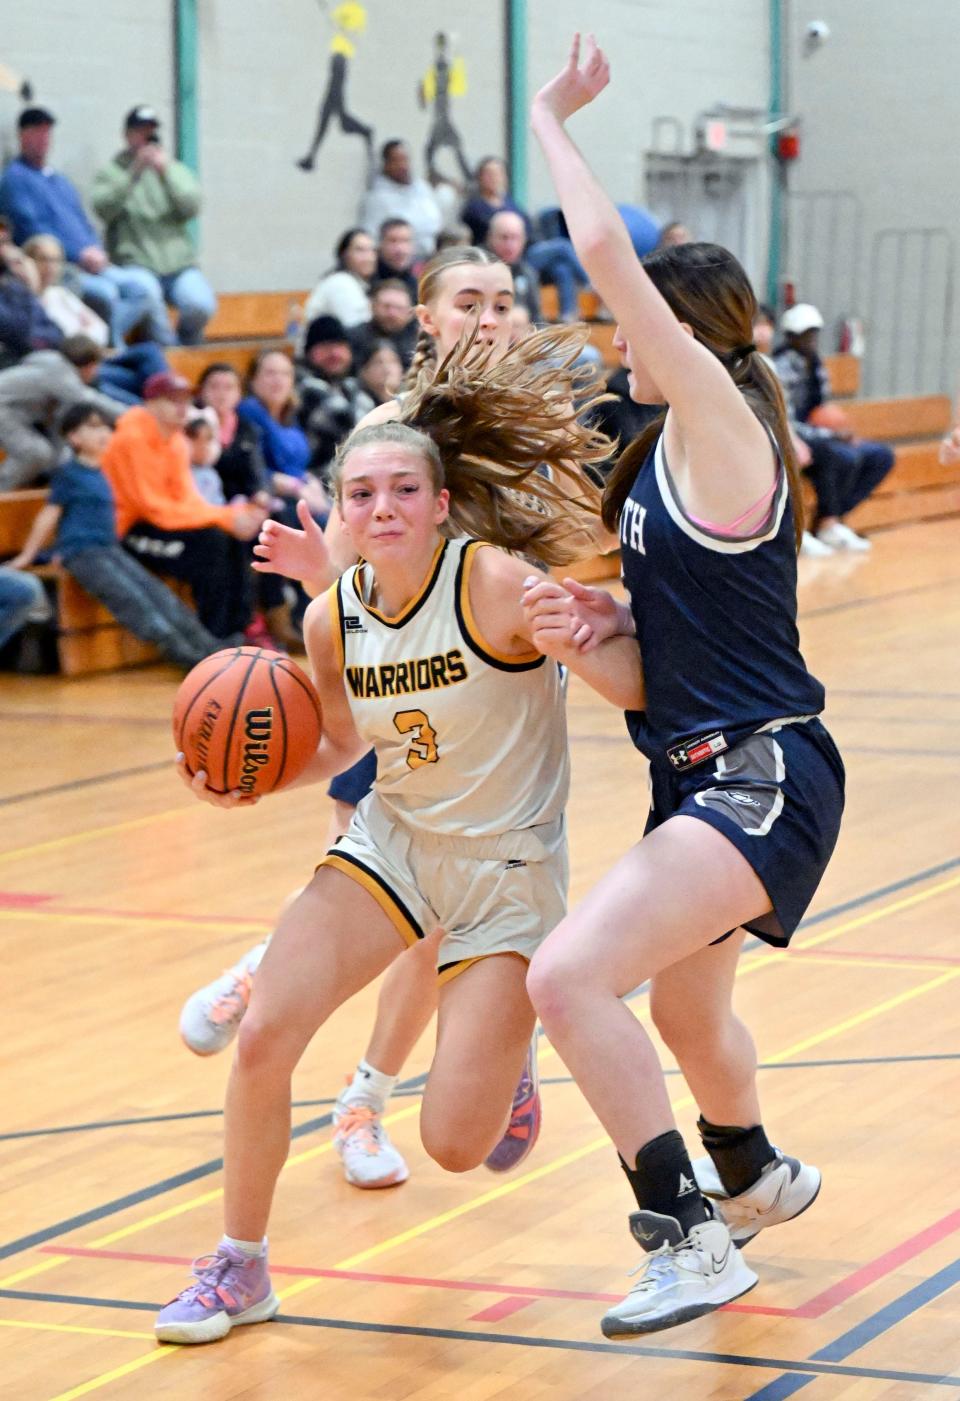 Jordyn Streitmatter of Nauset drives the lane against Lila Connolly of Plymouth North during a game Friday in Orleans.